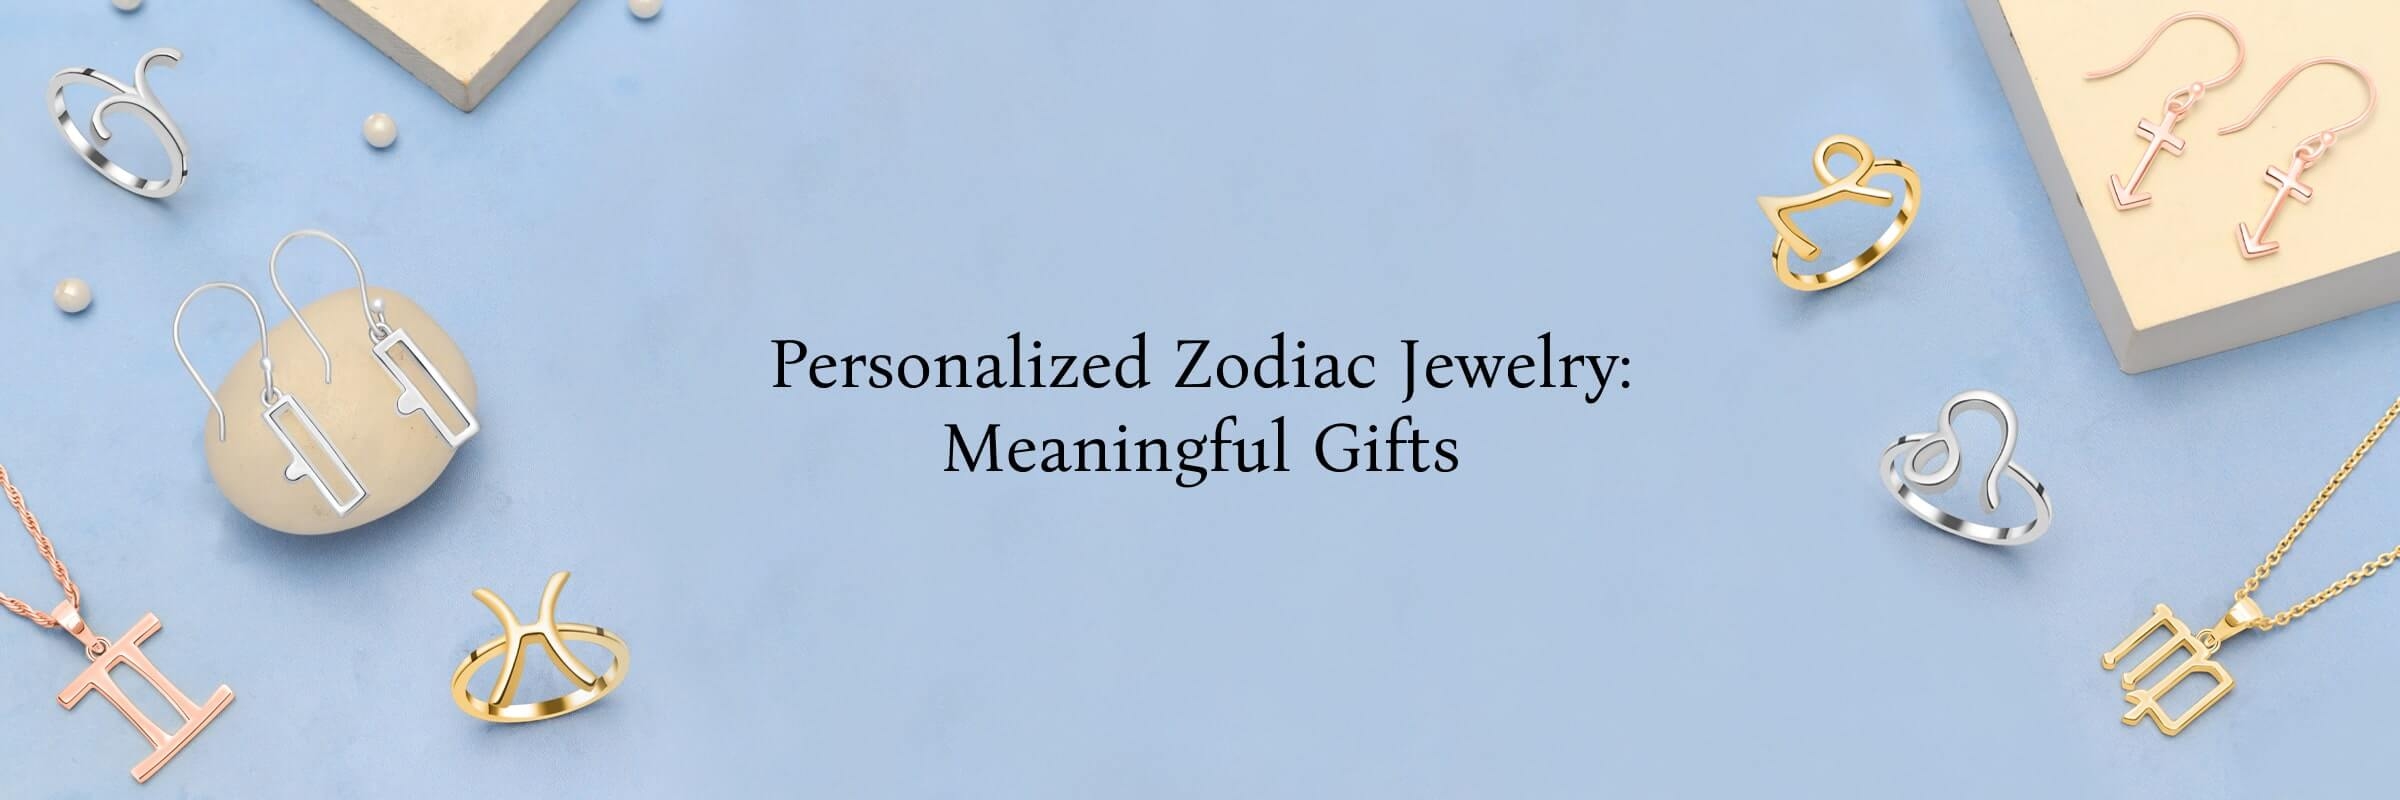 Zodiac Sign Jewelry - The Ideal Present for a Personal Connection